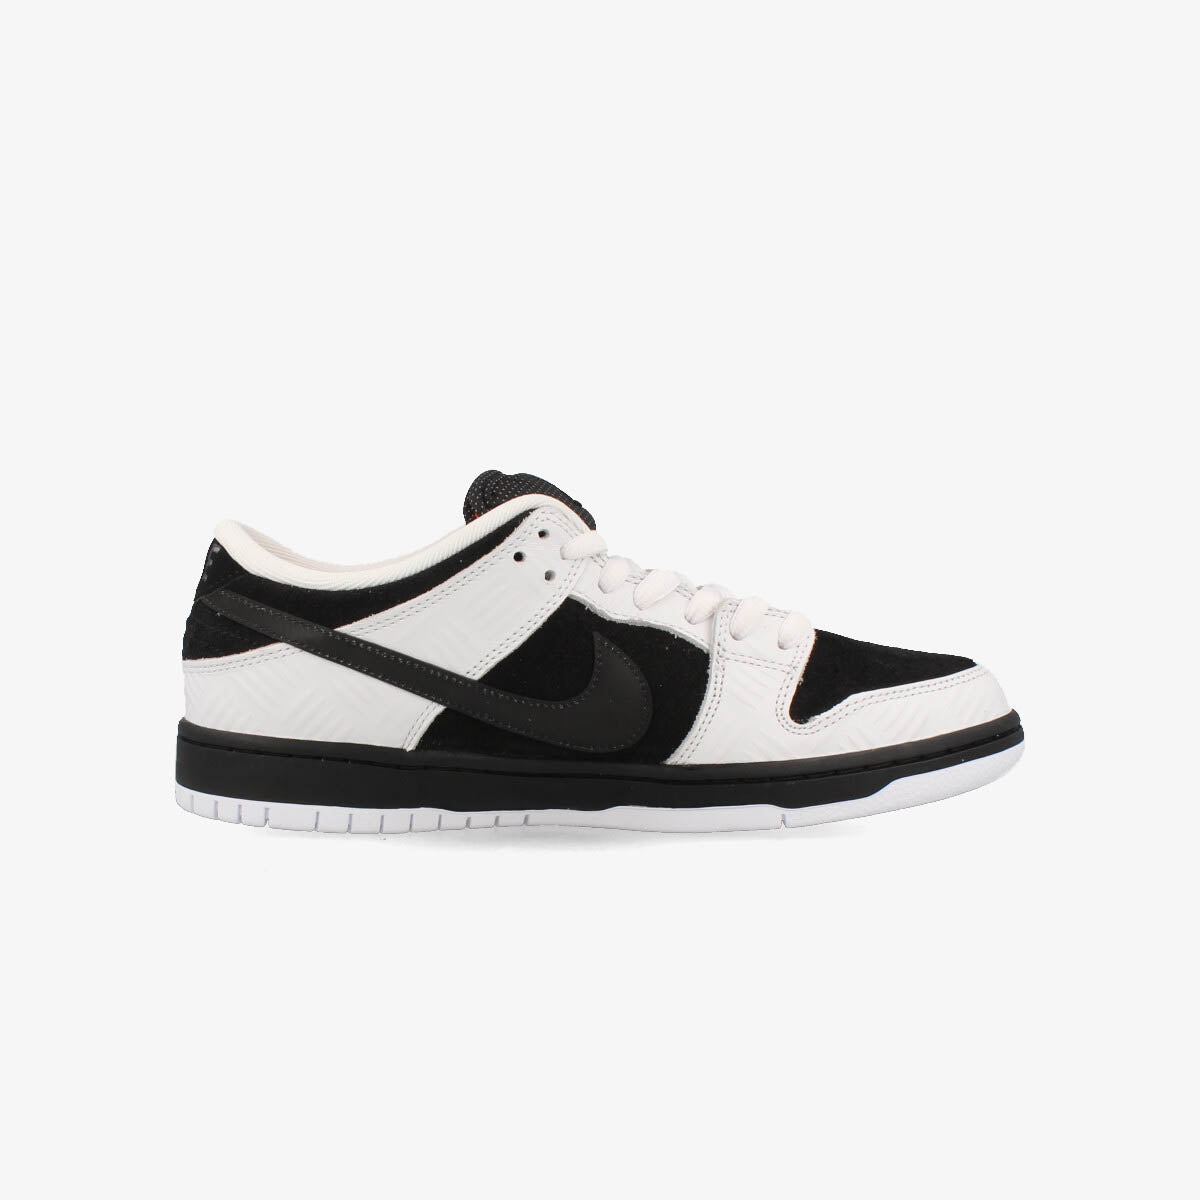 NIKE SB DUNK LOW PRO QS 【TIGHTBOOTH PRODUCTION】 WHITE/BLACK/SAFETY ORA